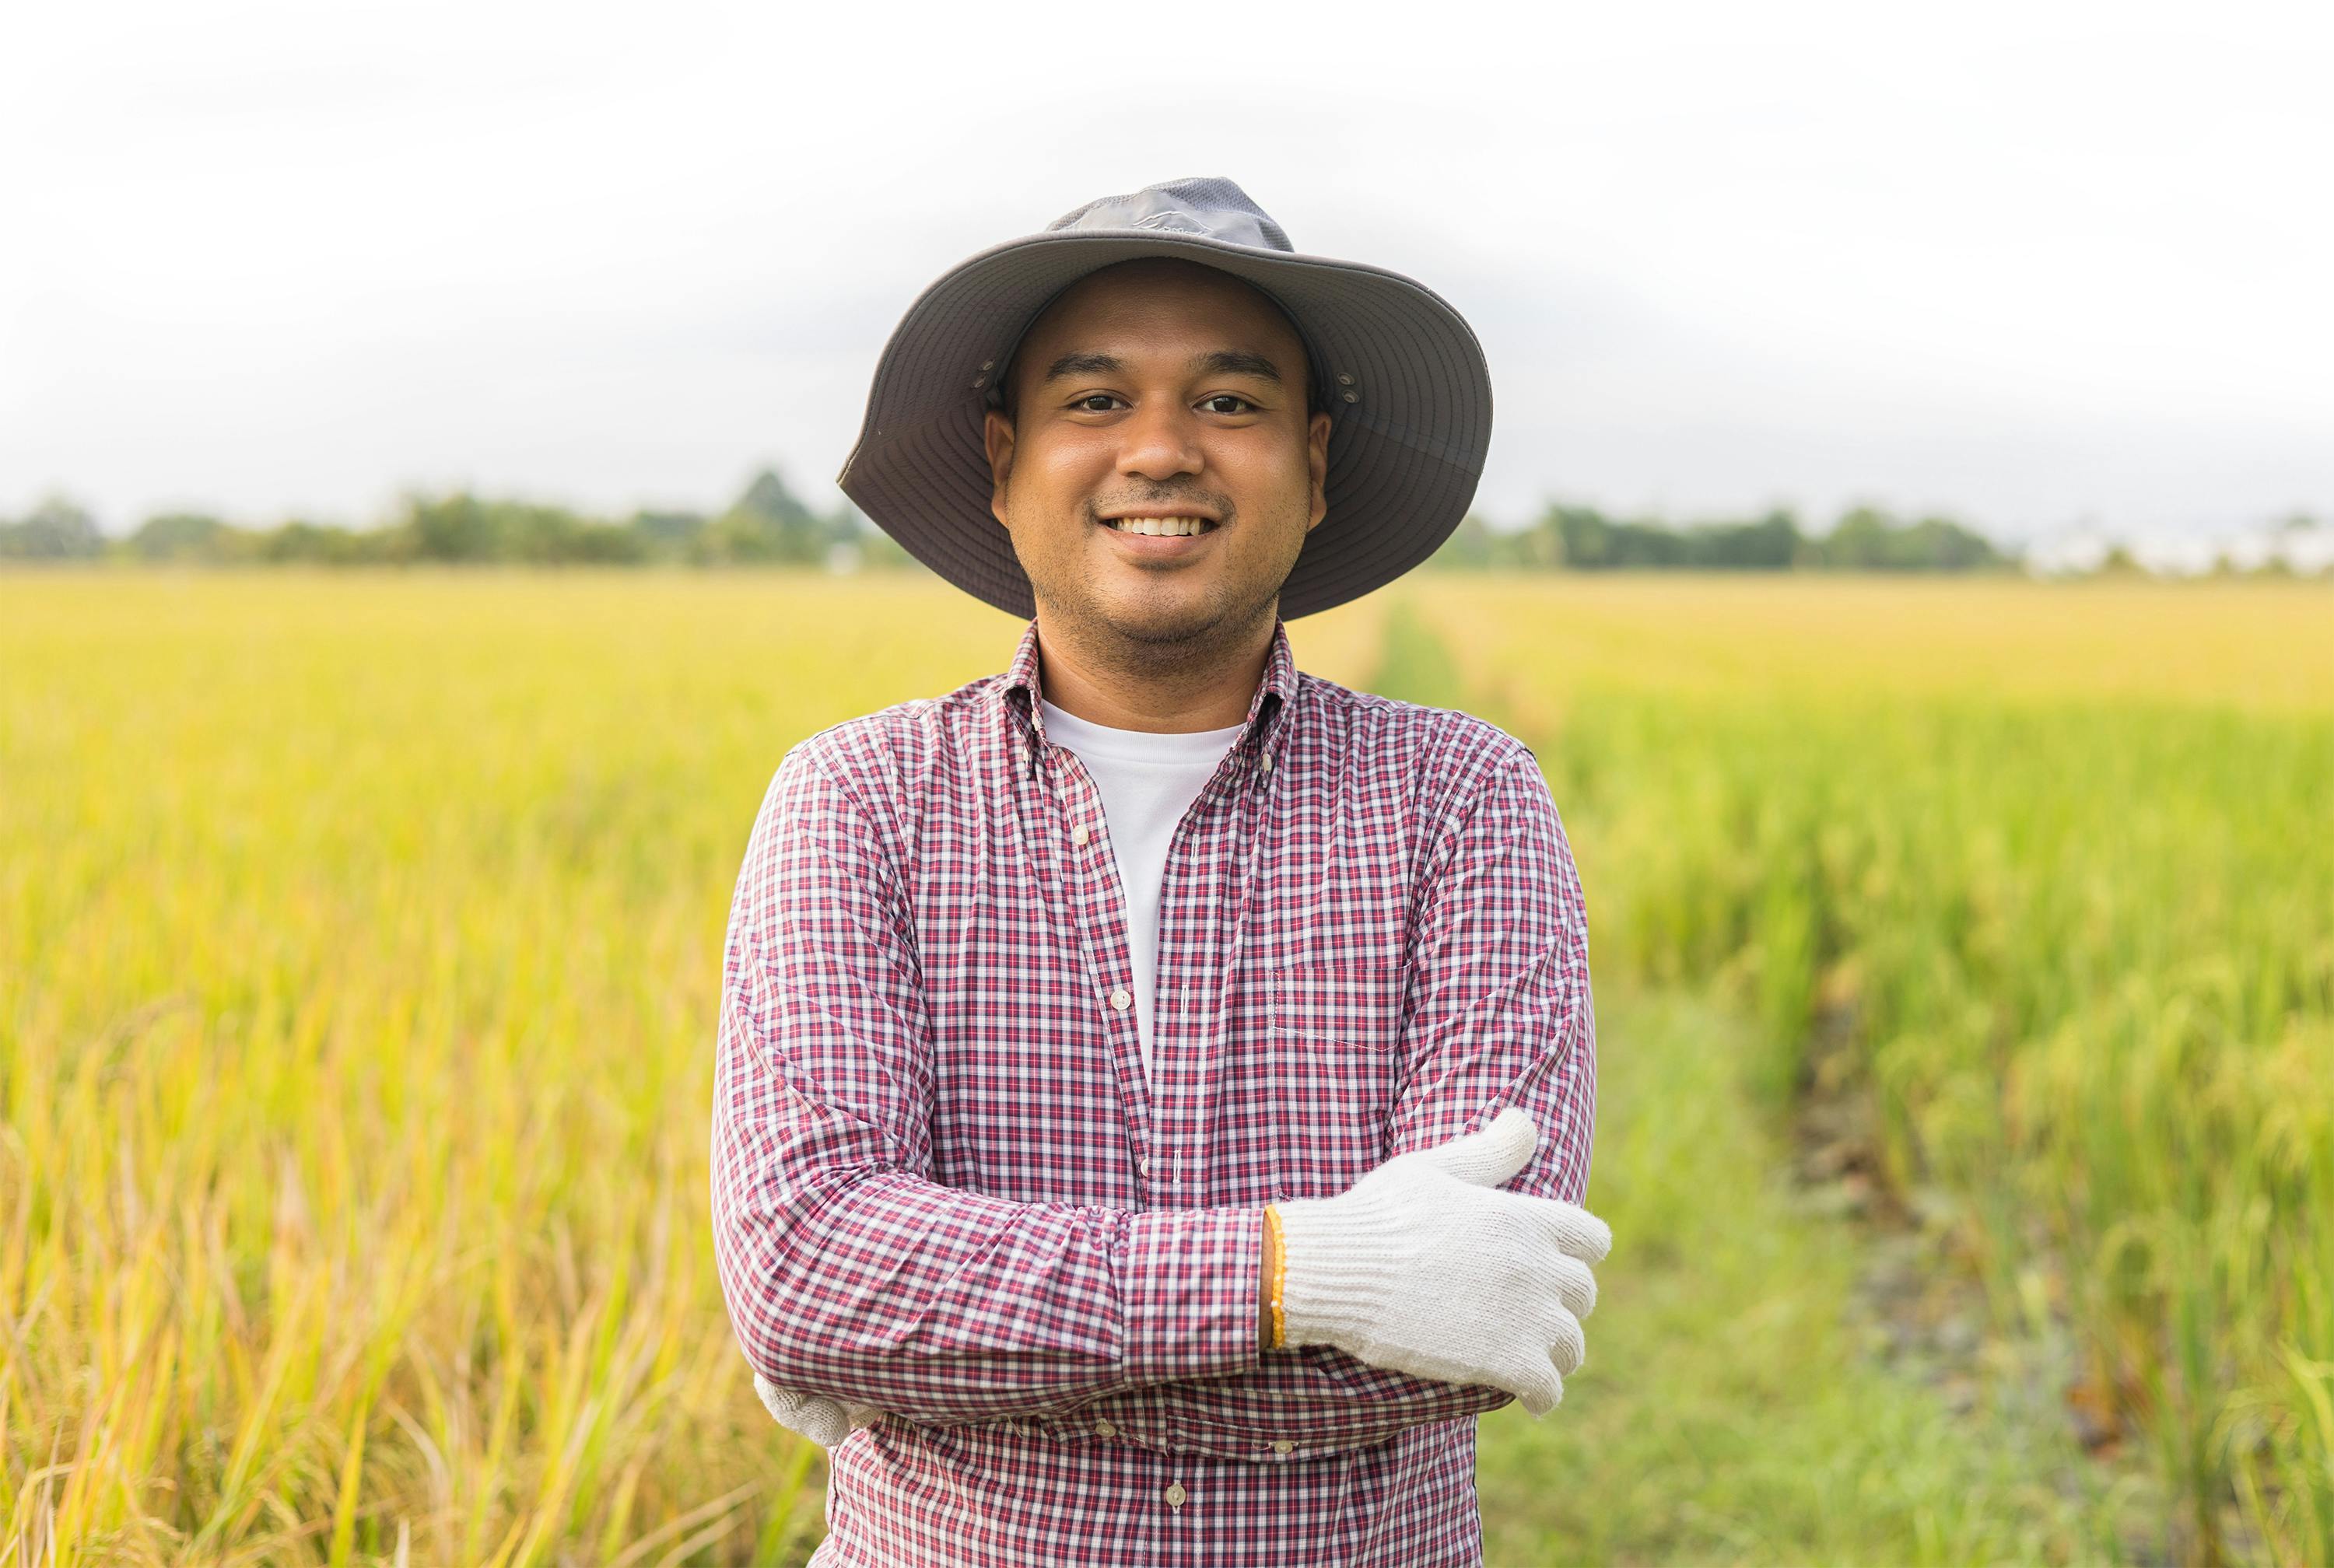 A rice farmer leaning on a tool in a fields